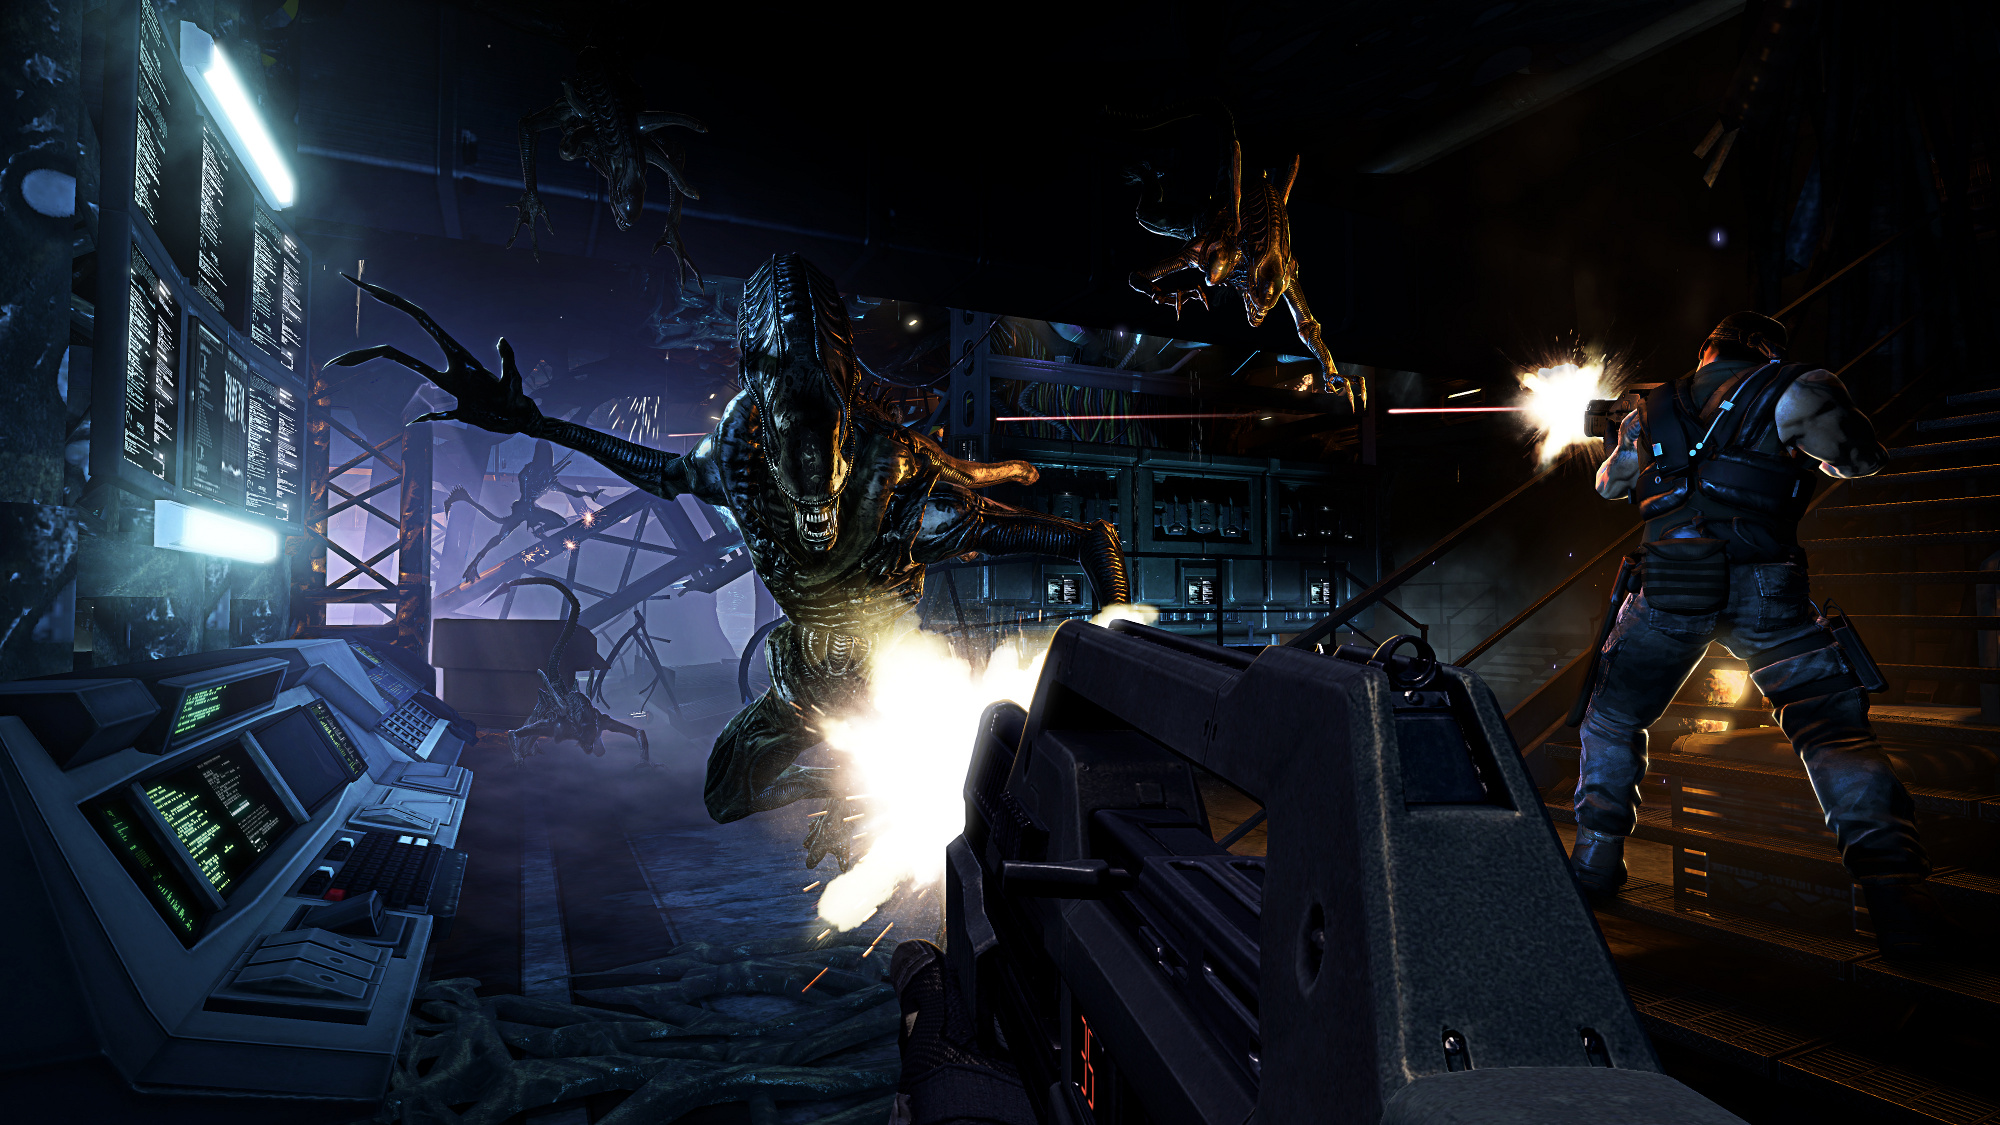 Cold Iron Studios Upcoming Alien Video Game Will Be a Multiplayer Shooter for PC and Consoles